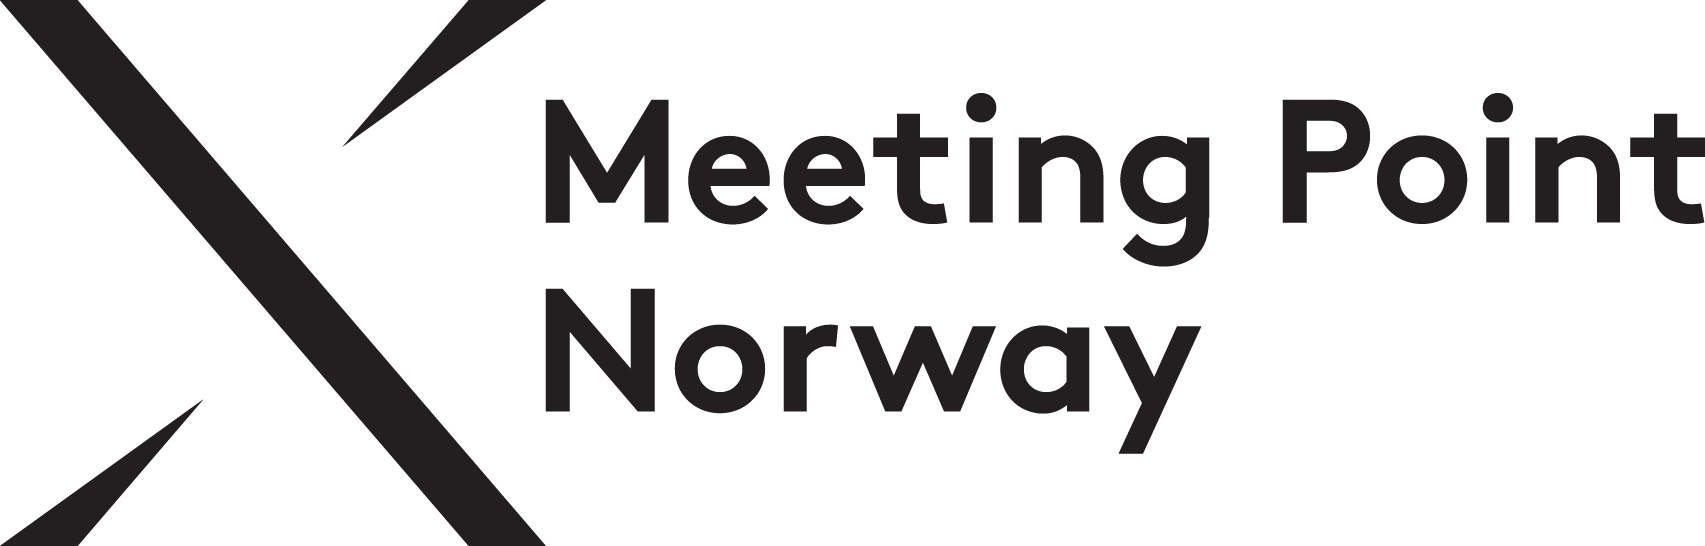 cropped-x-meeting-point-norway